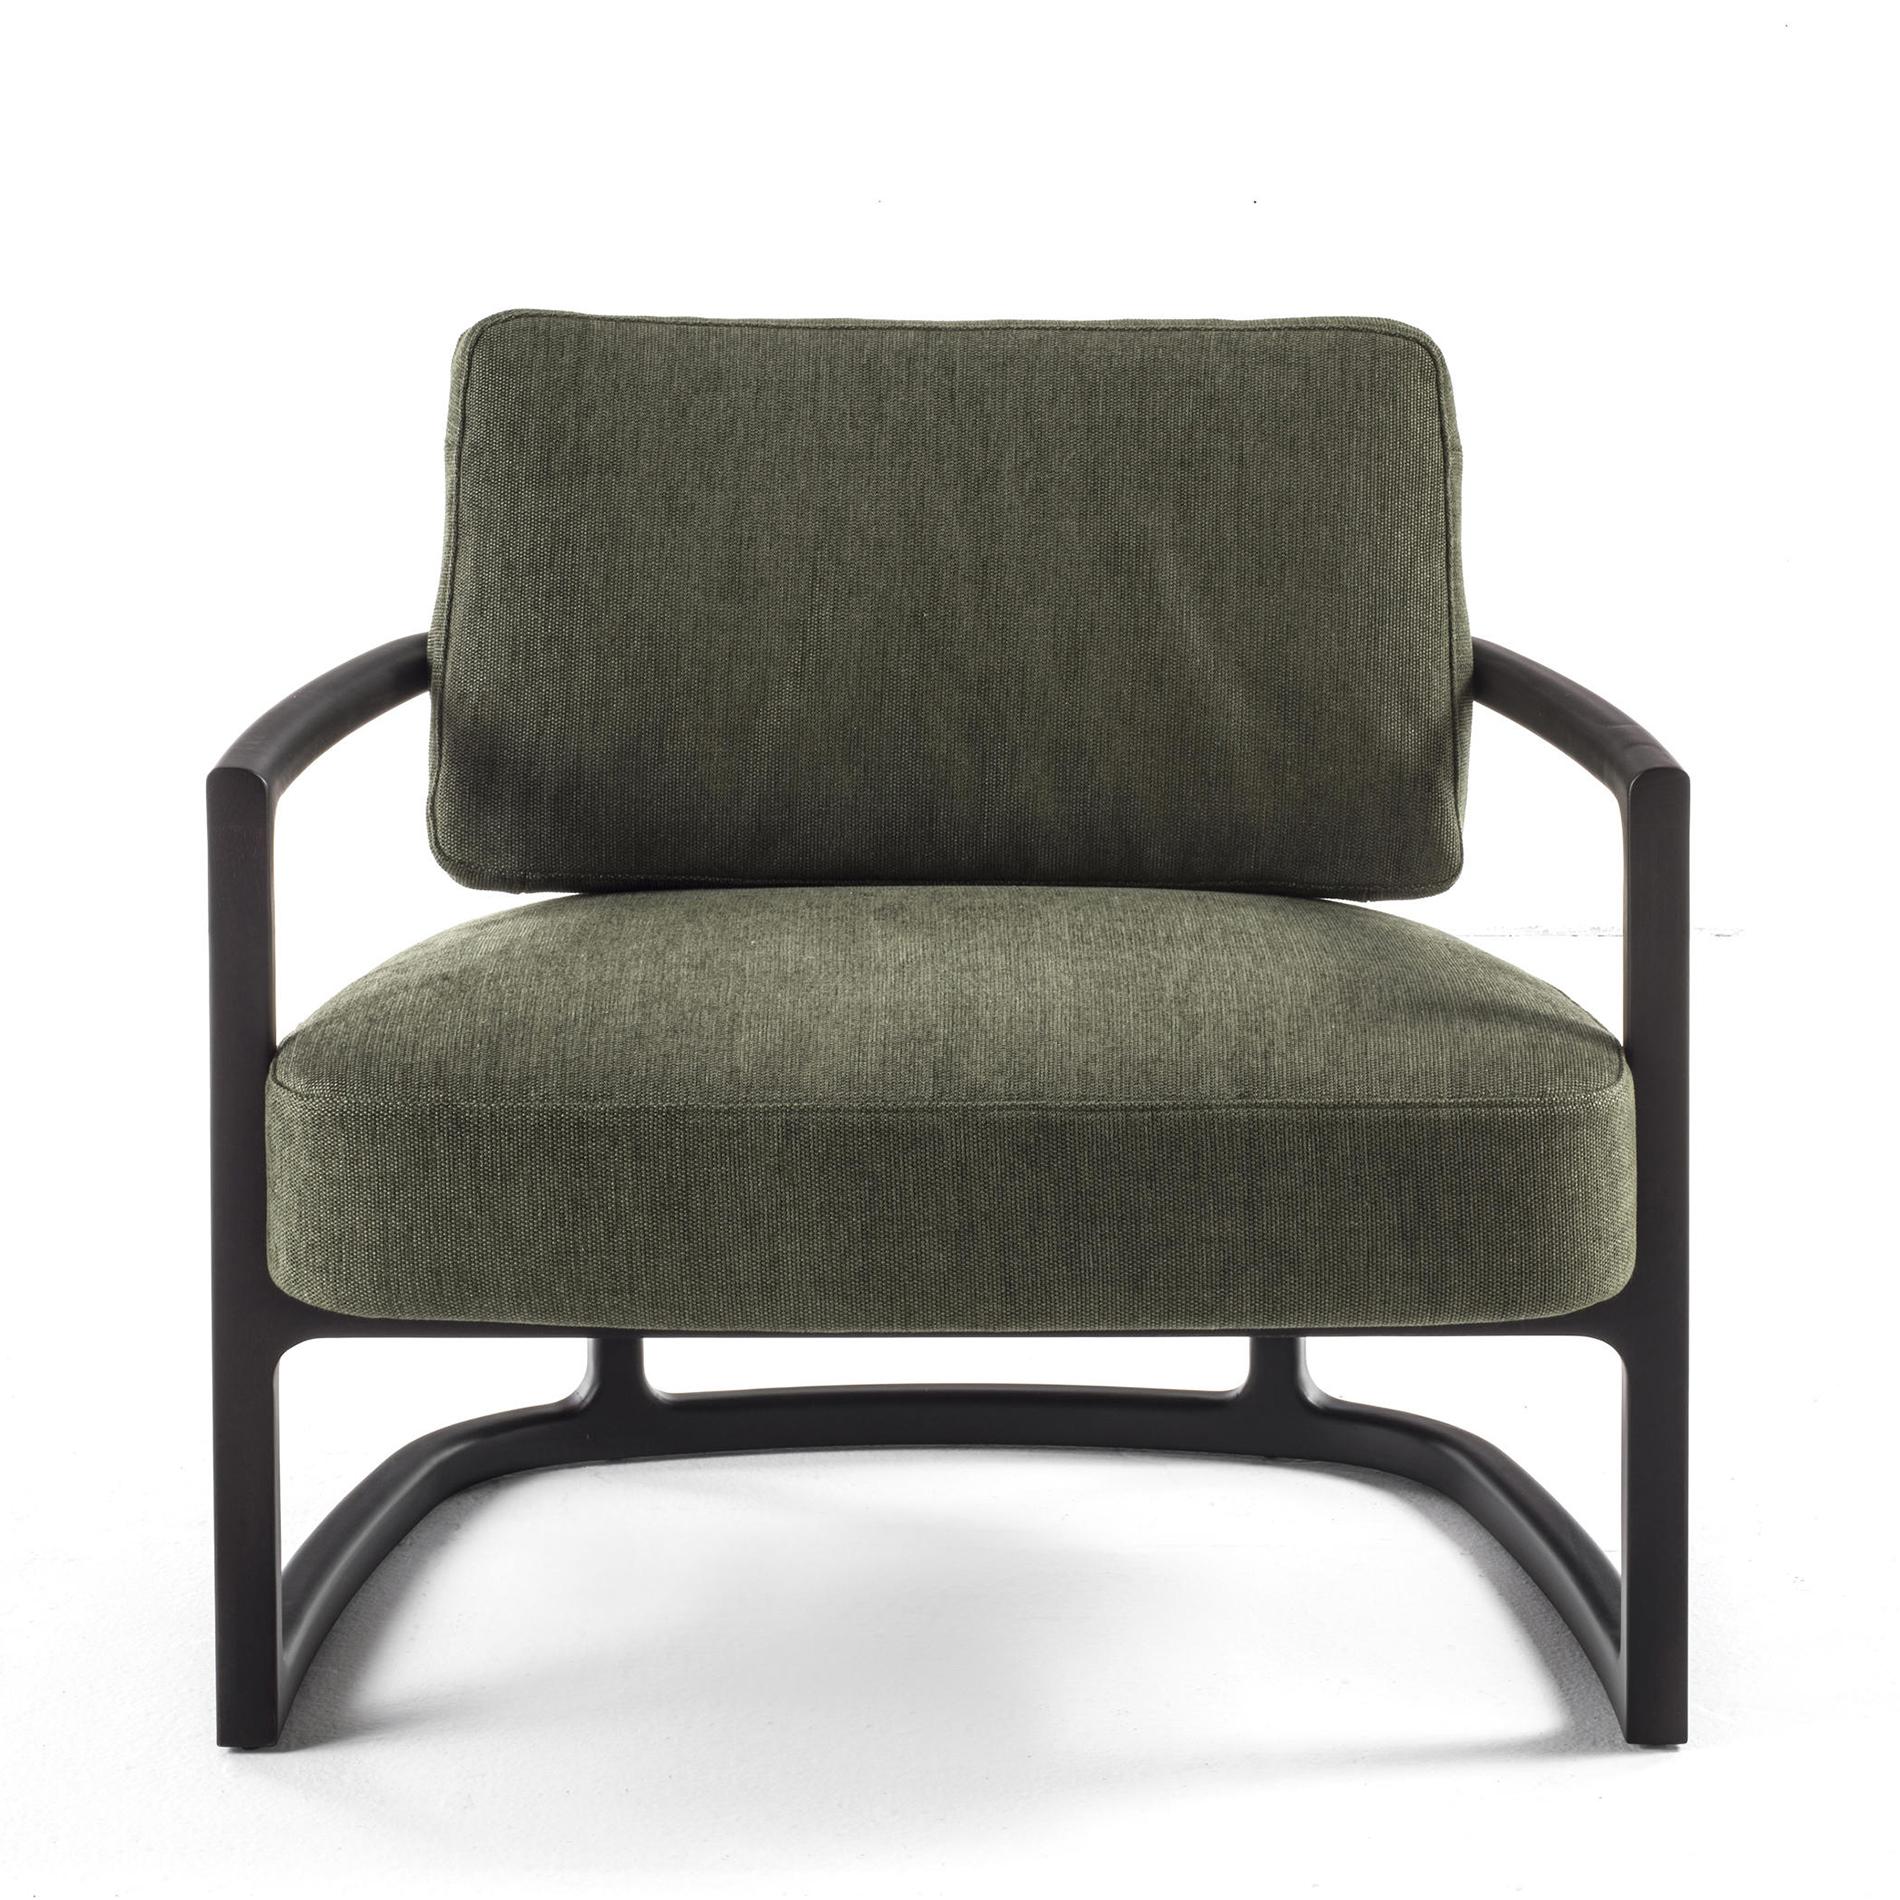 Armchair partner with structure in solid ash wood
in wengé colored finish. Upholstered and covered
with green coton fabric Cat C.
Also available with other fabrics on request.